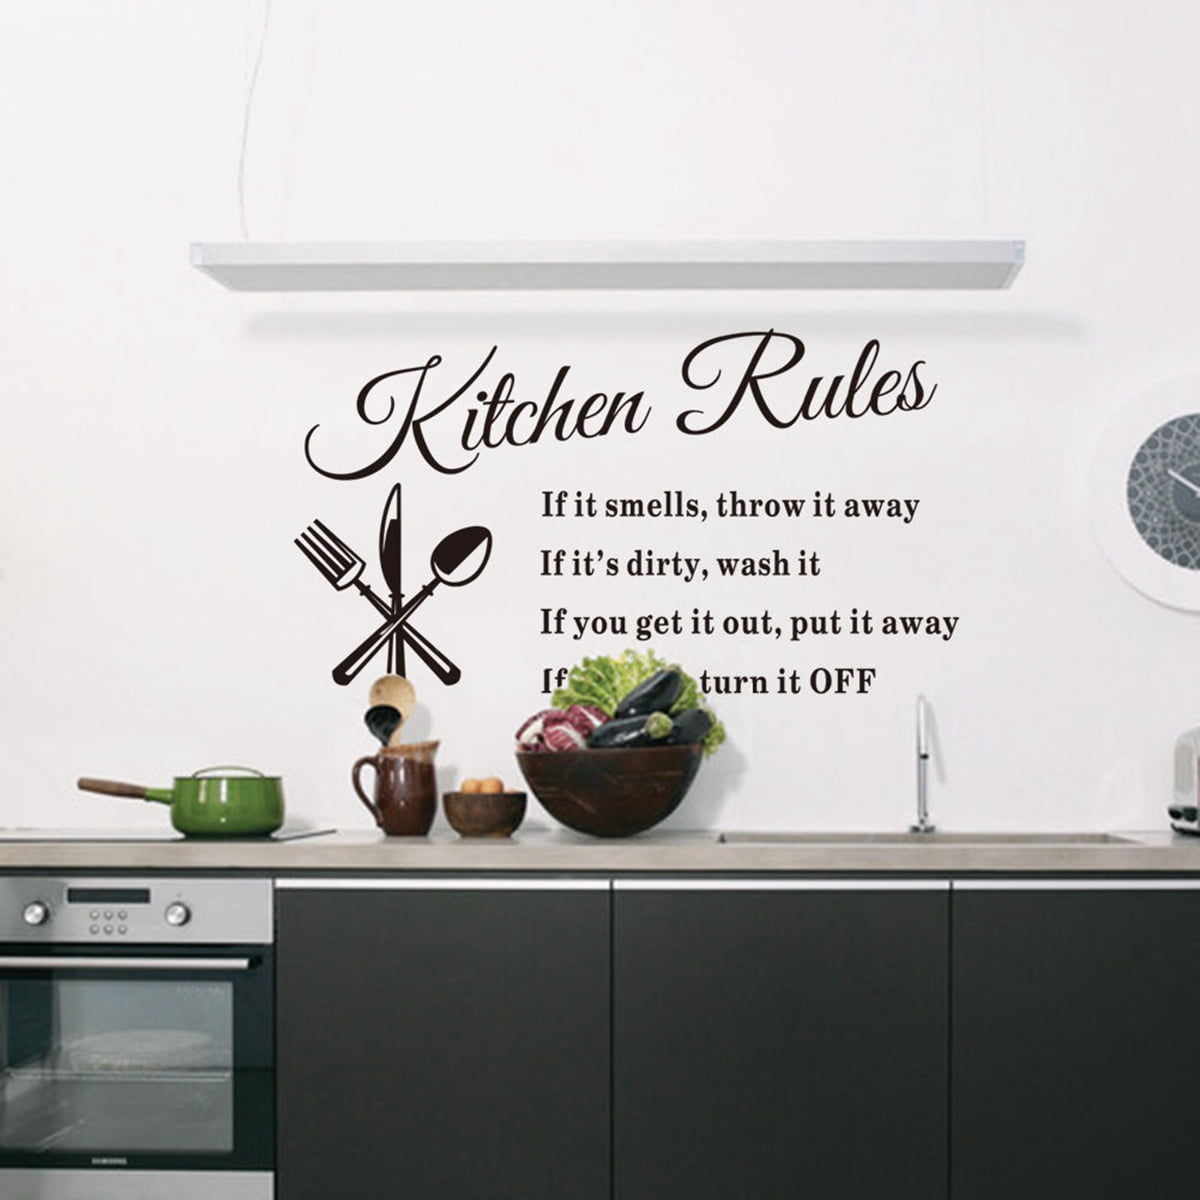 1Pc-Removable-Kitchen-Rules-Words-Wall-Stickers-Decal-Home-Decor-Vinyl-Art-Mural 